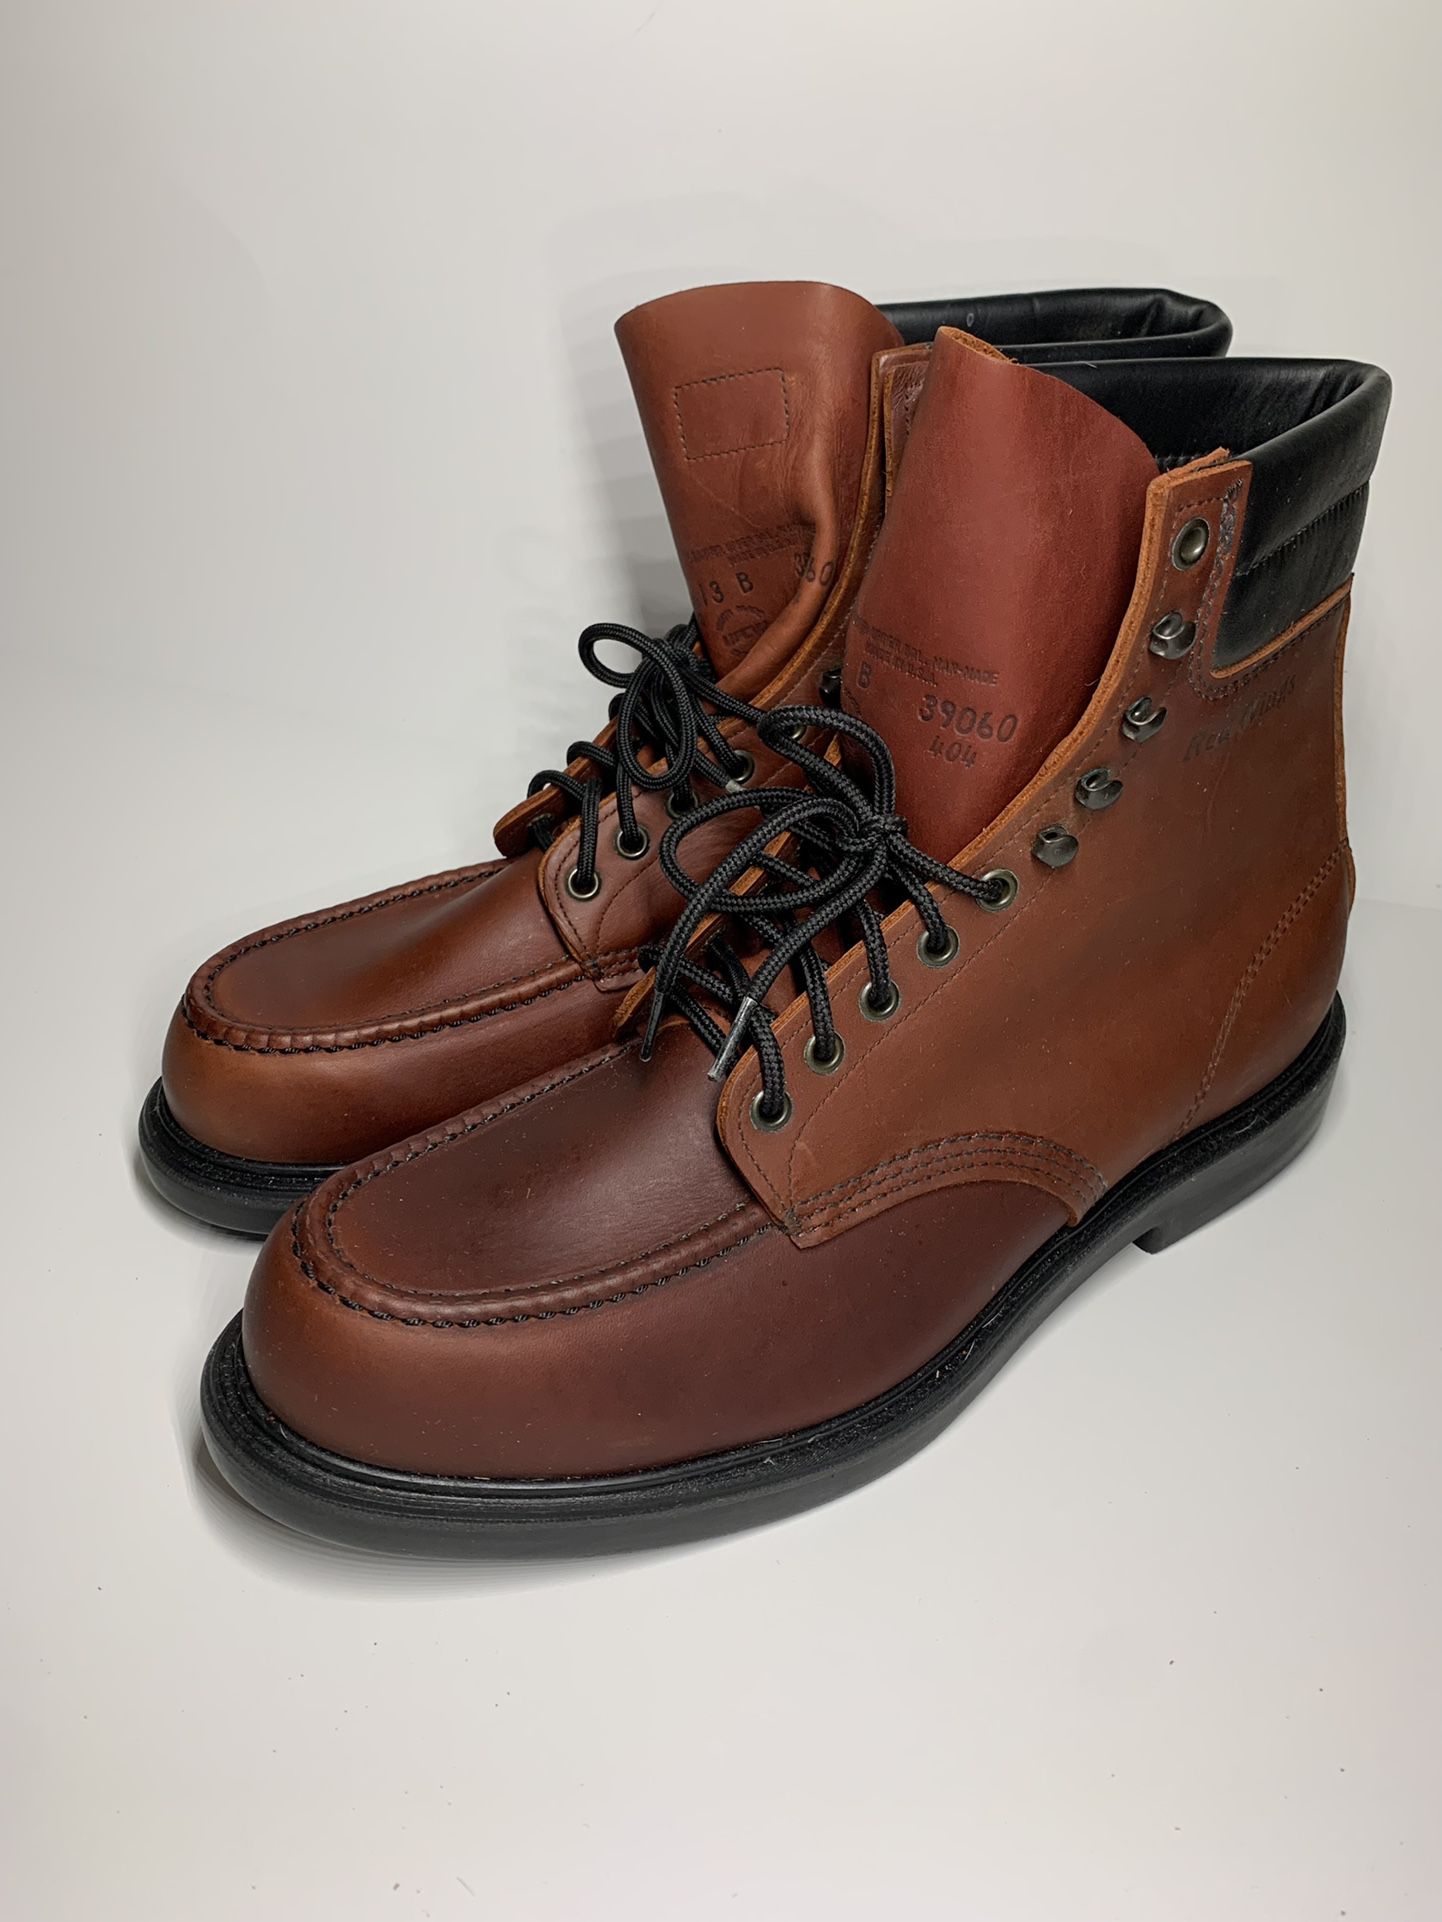 A Must Have Brand New Mens Red Wing Super Sole Work Boots